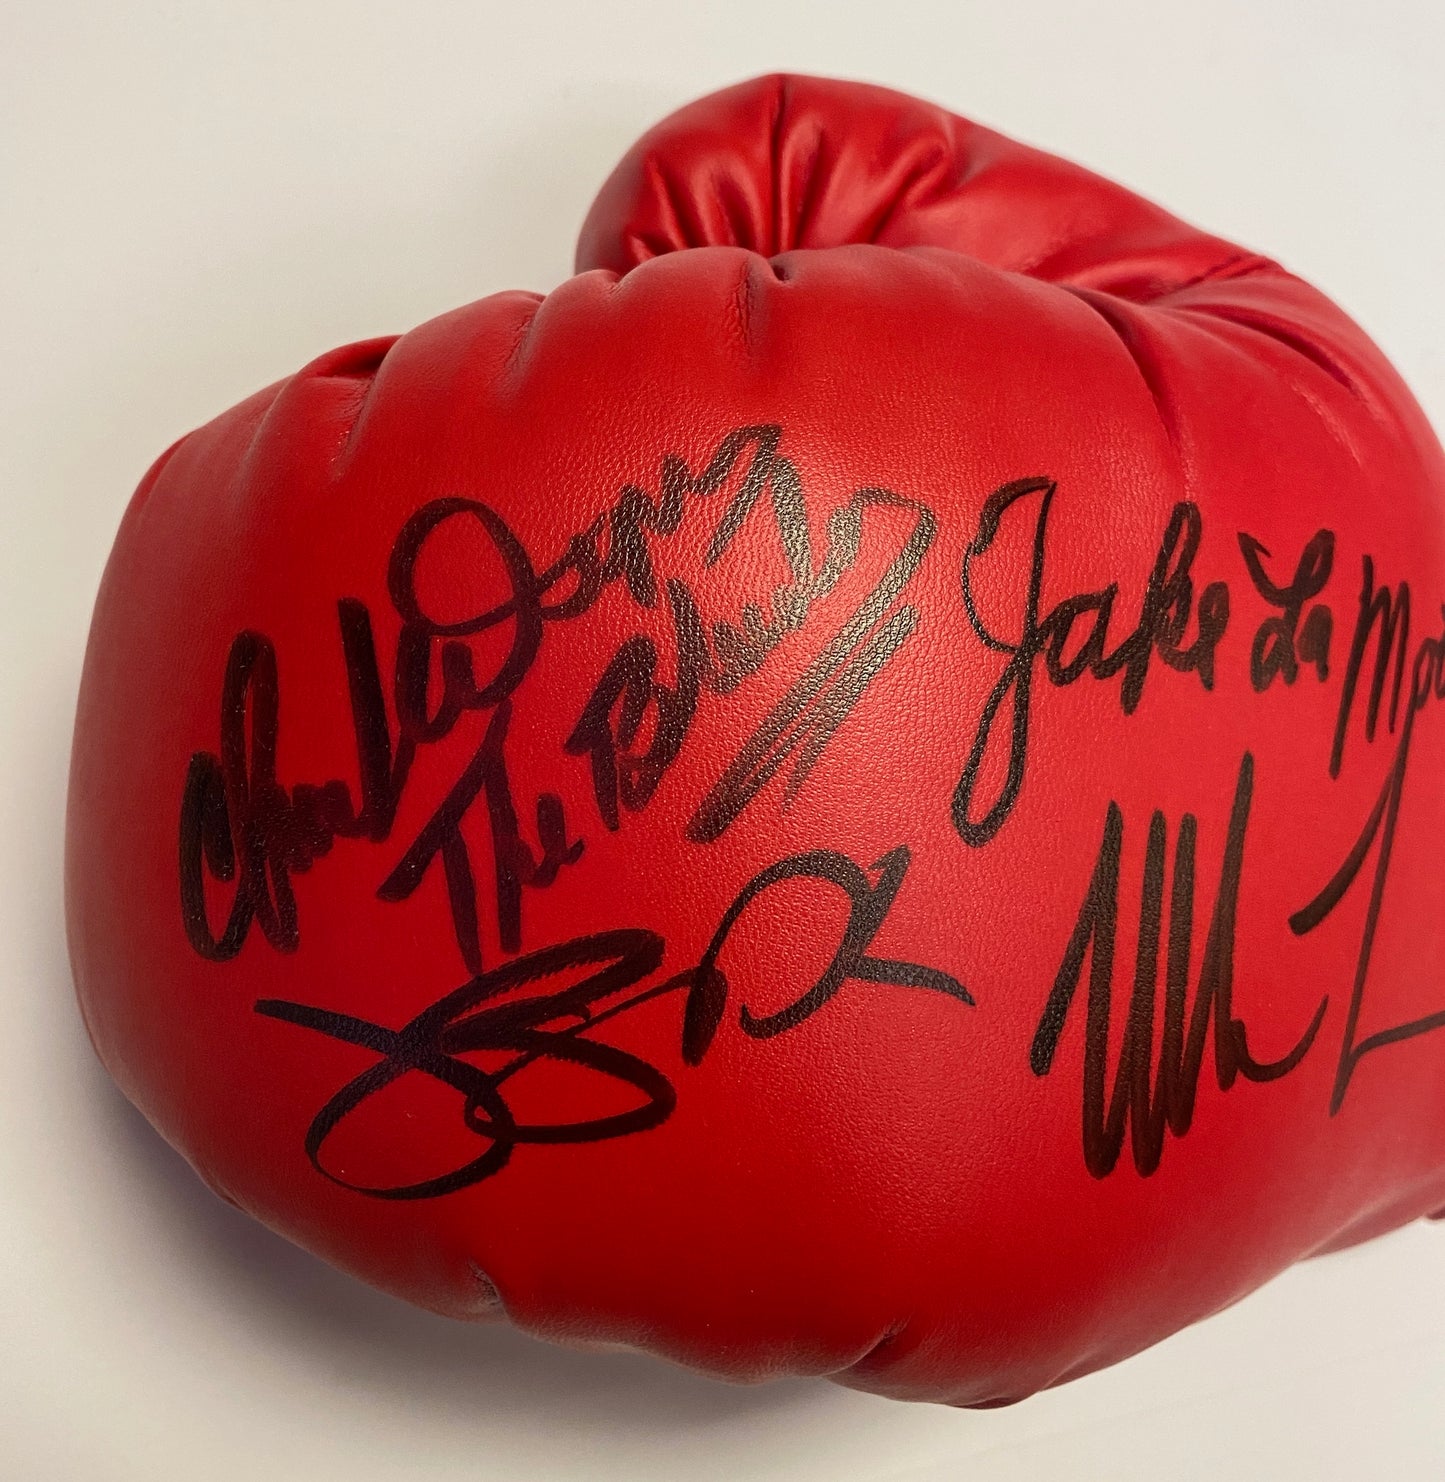 Mike Tyson, Jake LaMotta, James Smith, Ray Mercer, Chuck Wepner, and Buster Douglas Signed Boxing Glove